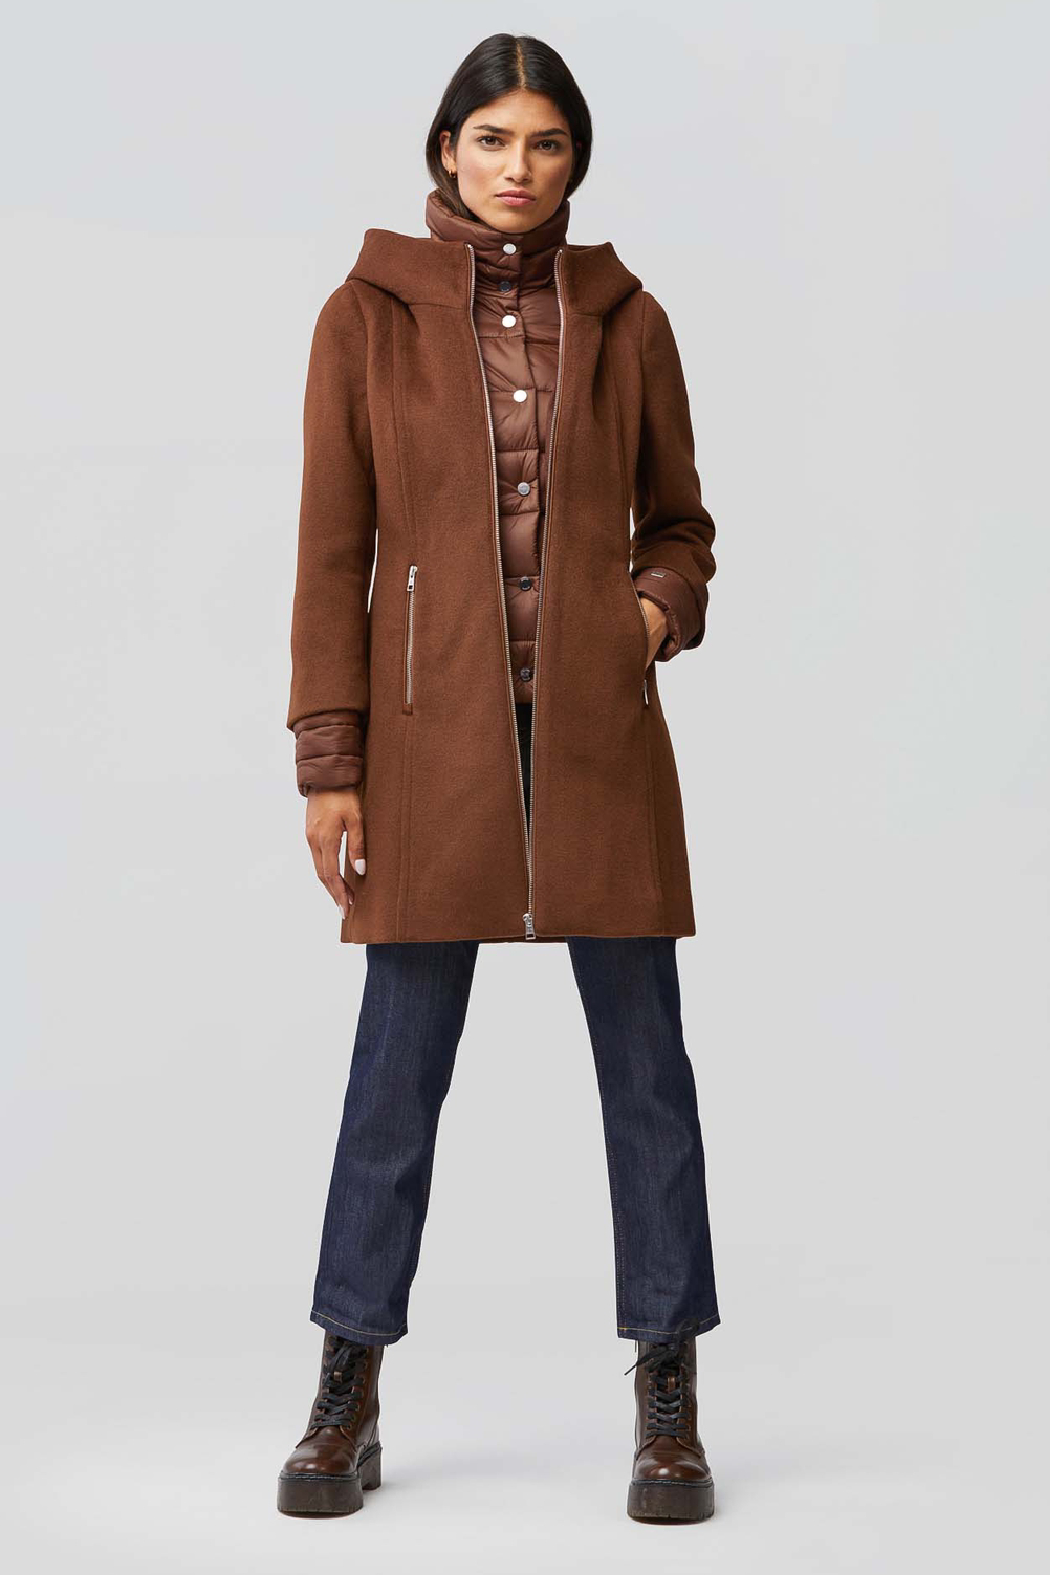 Rooney-N Wool Coat with Puffy Collar